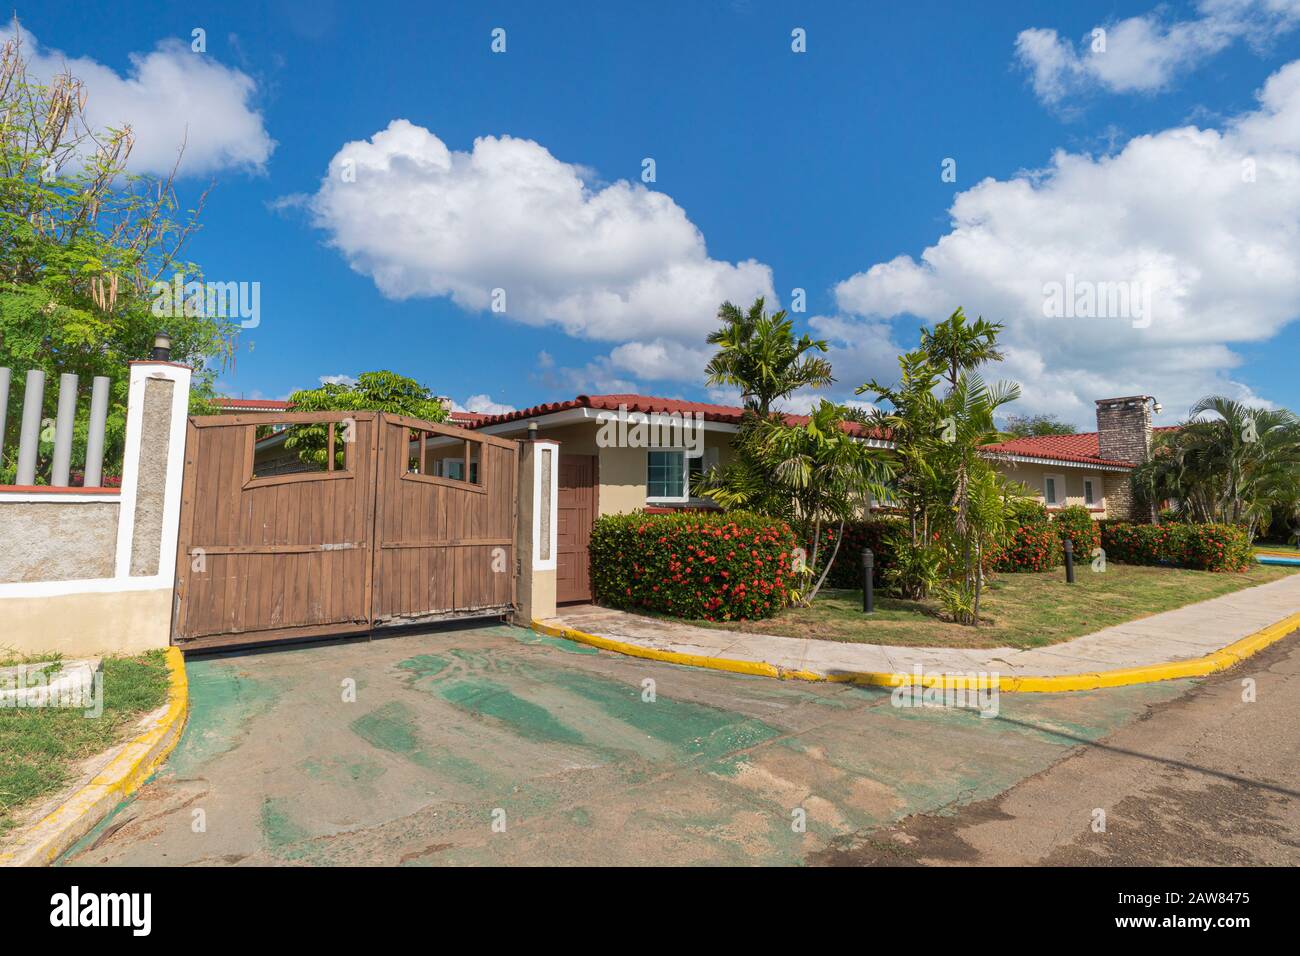 Gate of the house. wooden gates for entering cars in front of a single-storey house. Traditional dwellings in Latin America Stock Photo